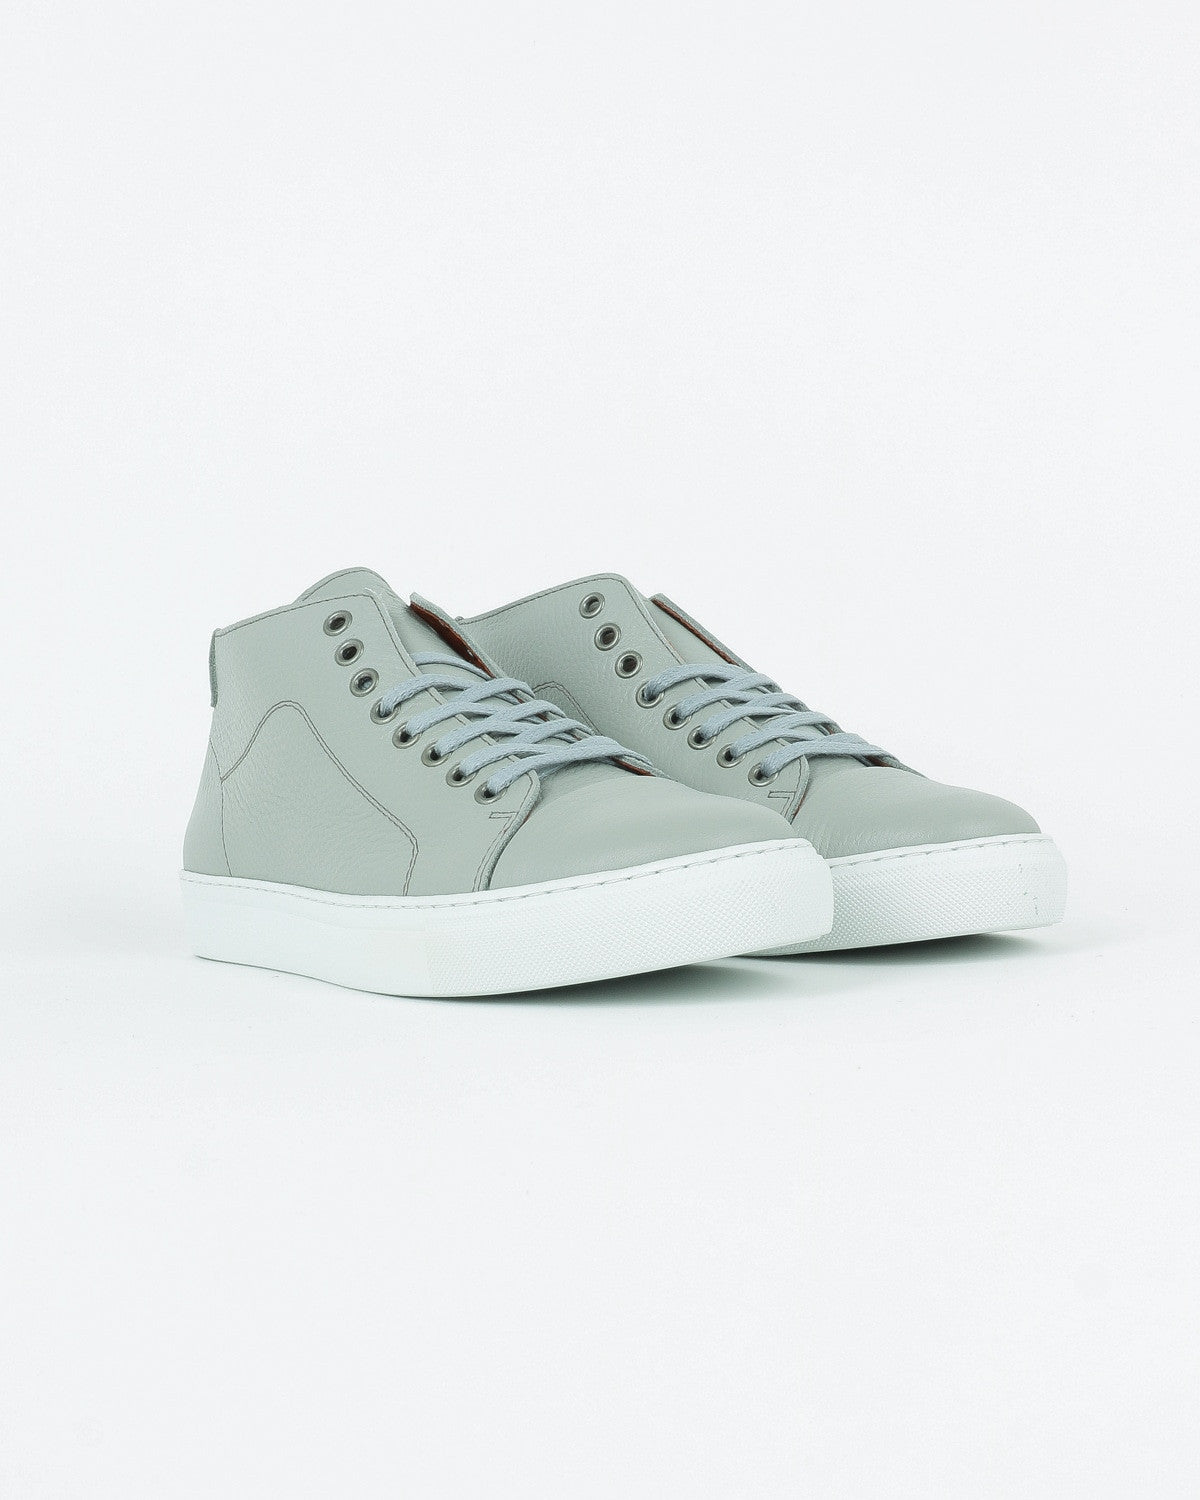 garment project_classic lace mid sneaker_grey floater_view_3_3